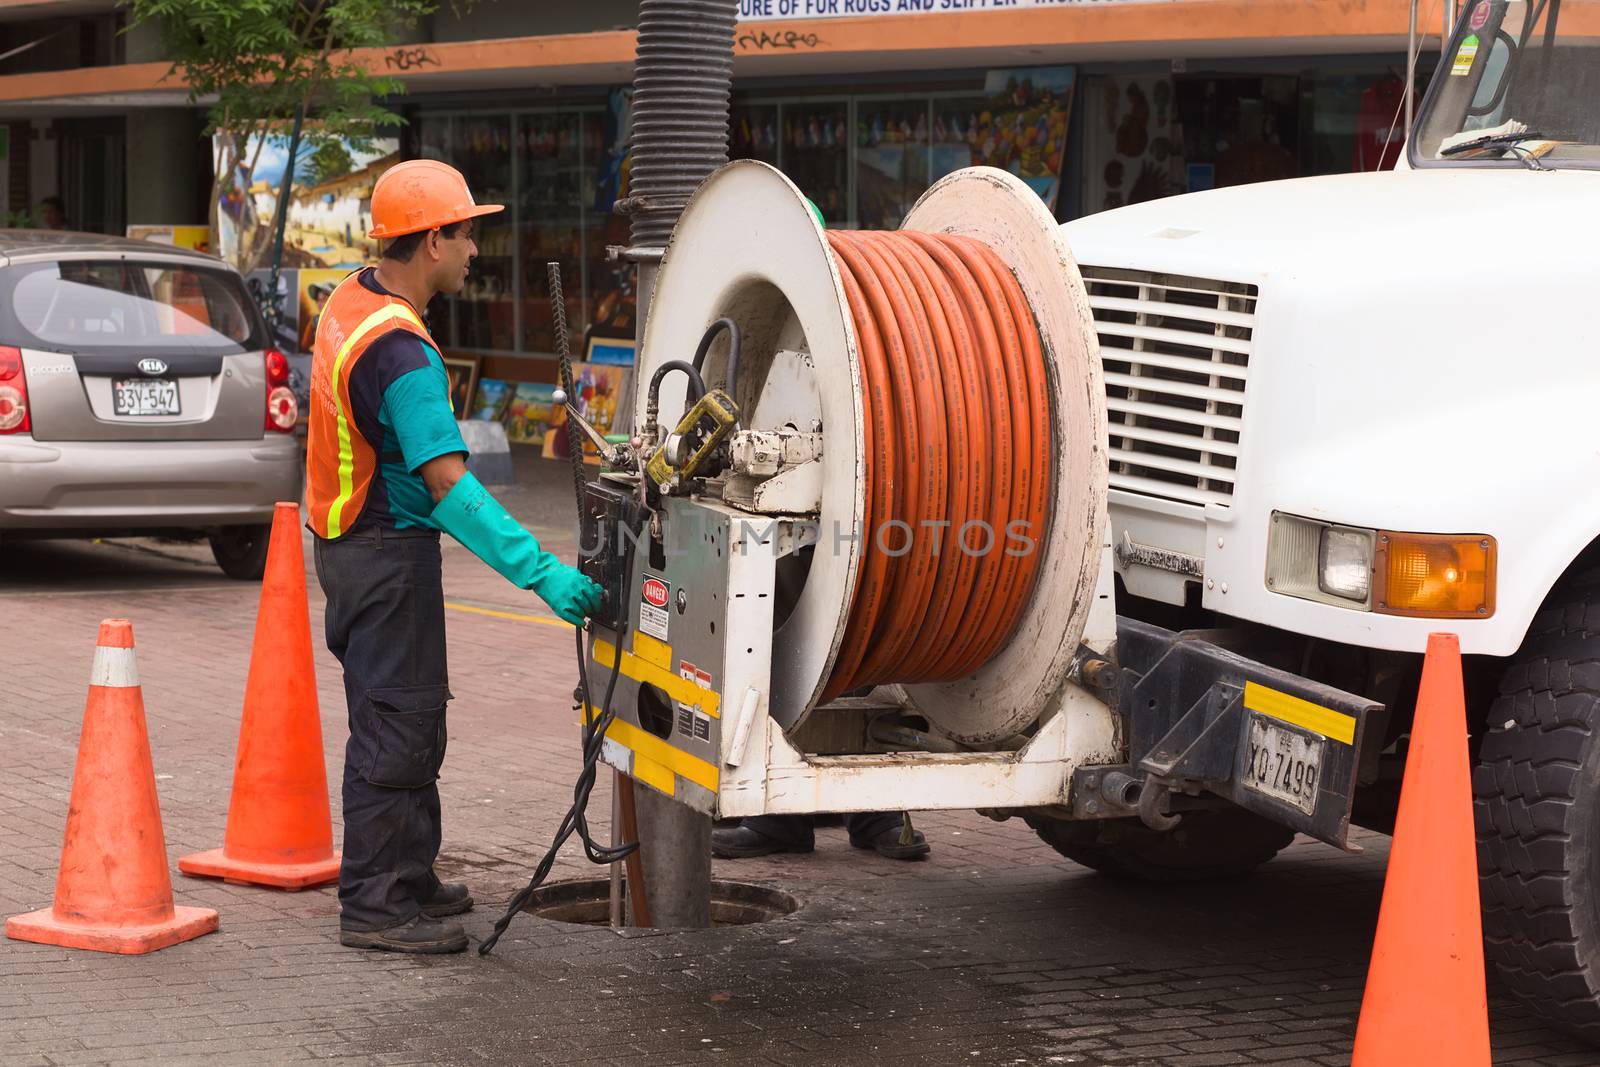 LIMA, PERU - FEBRUARY 11, 2012: Unidentified person of the Concyssa S.A. company cleaning the sewage with the help of a truck on February 11, 2012 in Miraflores, Lima, Peru